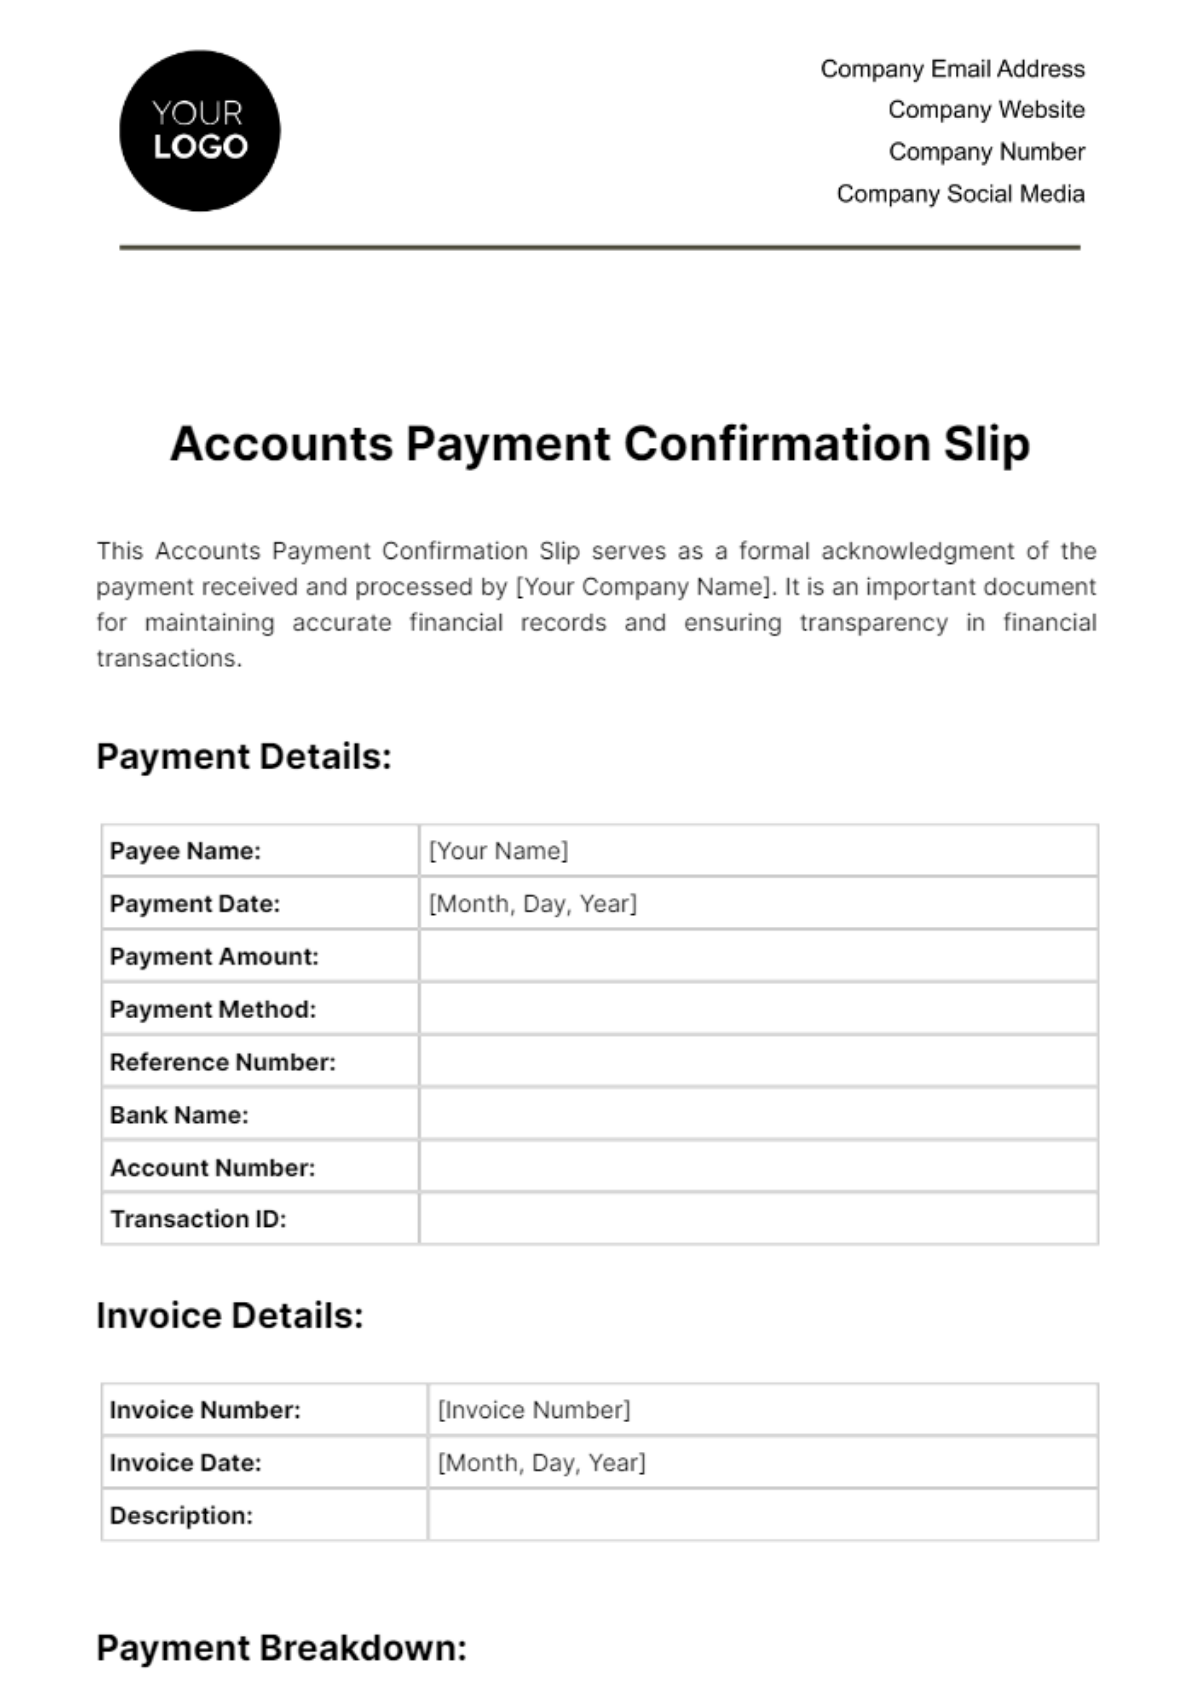 Free Accounts Payment Confirmation Slip Template